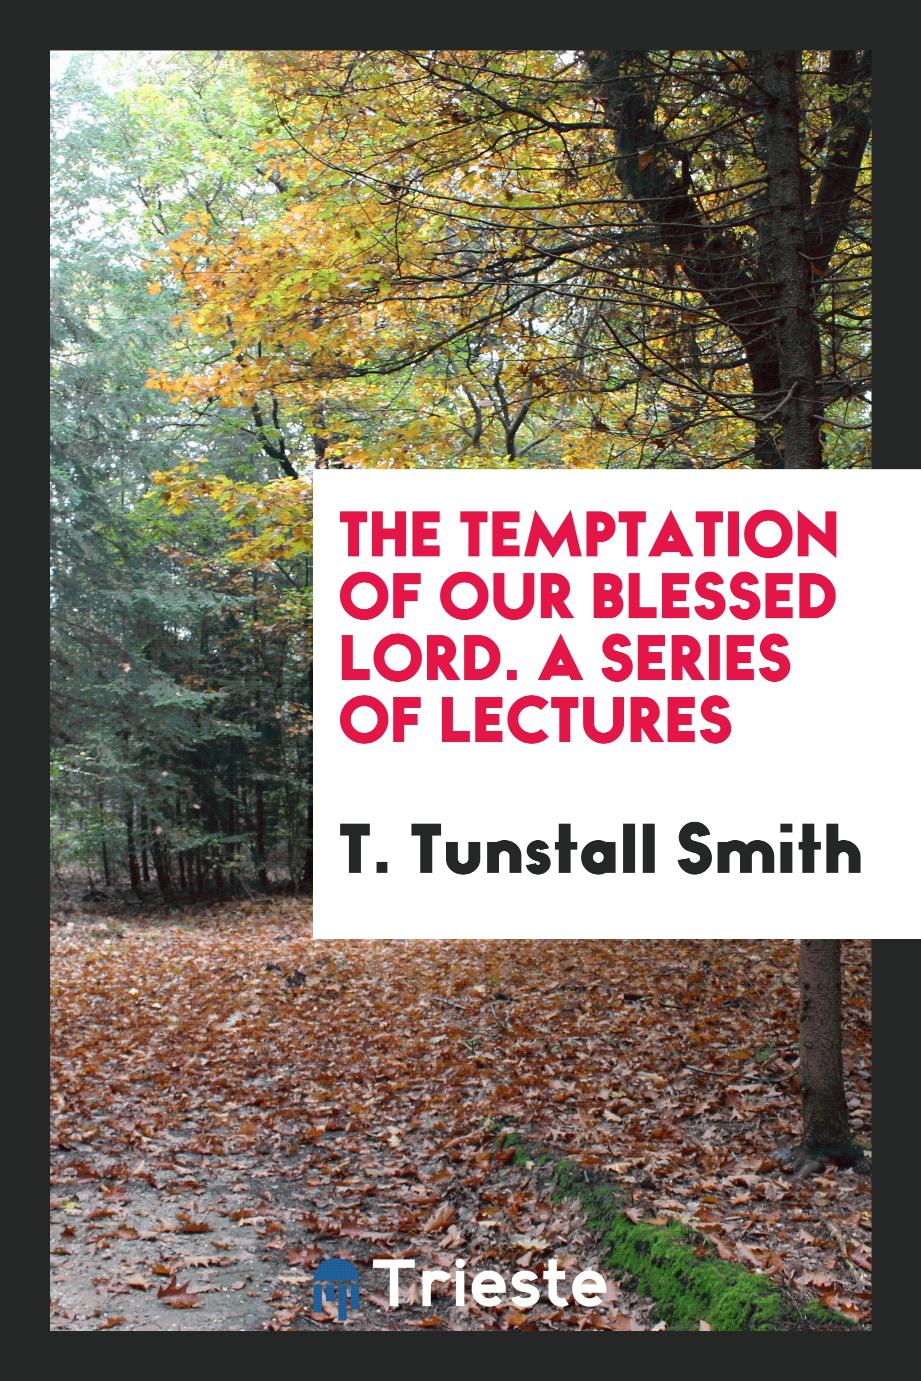 The Temptation of Our Blessed Lord. A Series of Lectures